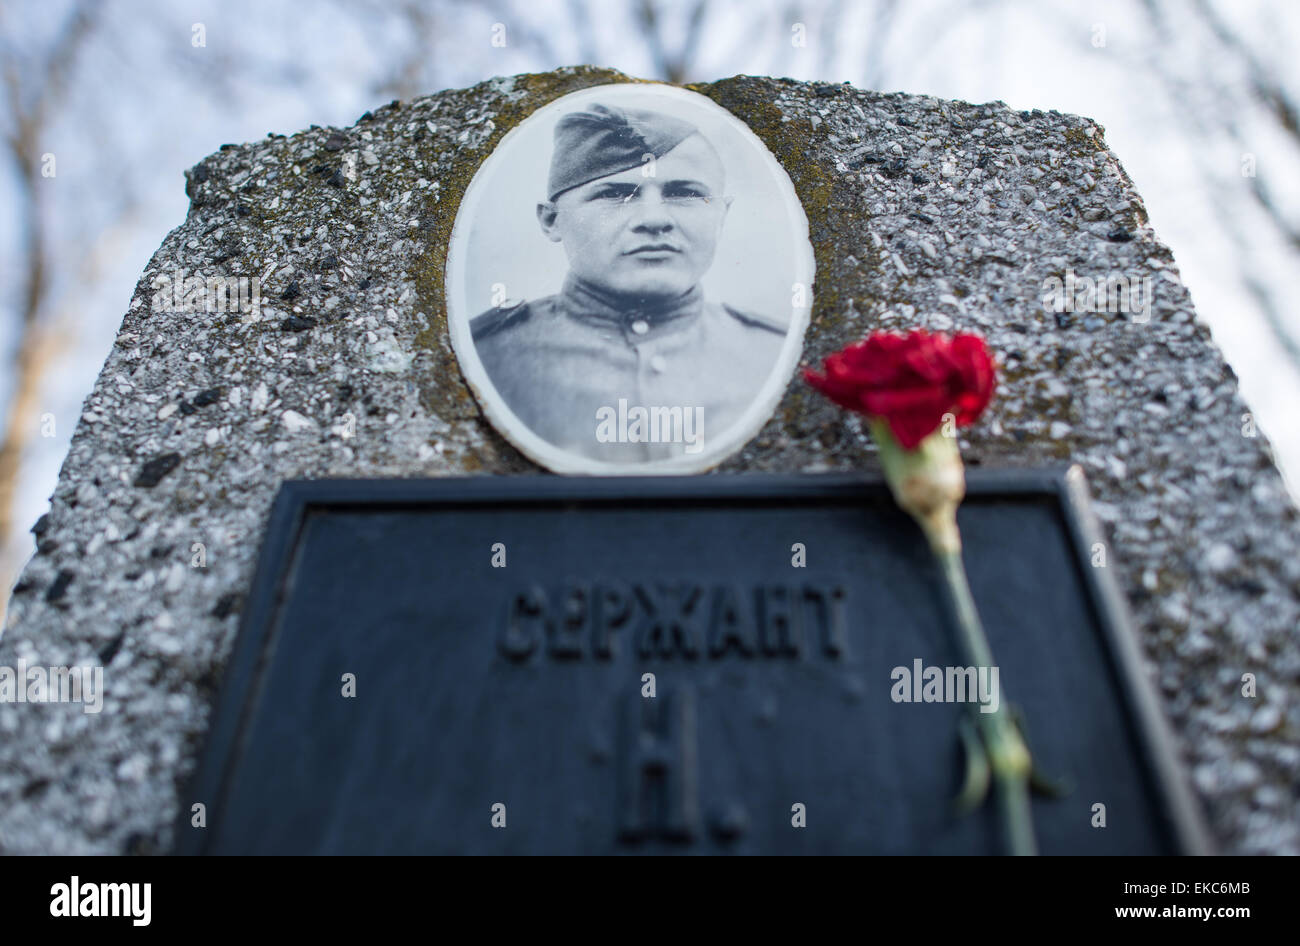 Seelow, Germany. 09th Apr, 2015. A tomb stone with a clove for a fallen soldier of the Red Army at the memorial Seelower Hoehen in Seelow, Germany, 09 April 2015. Shortly before the end of World War II ten thousands of soldiers and civilians died during the battle of the Seelower Hoehen, East of Berlin, which is now known as the largest battle of World War II on German ground. Photo: PATRICK PLEUL/dpa/Alamy Live News Stock Photo